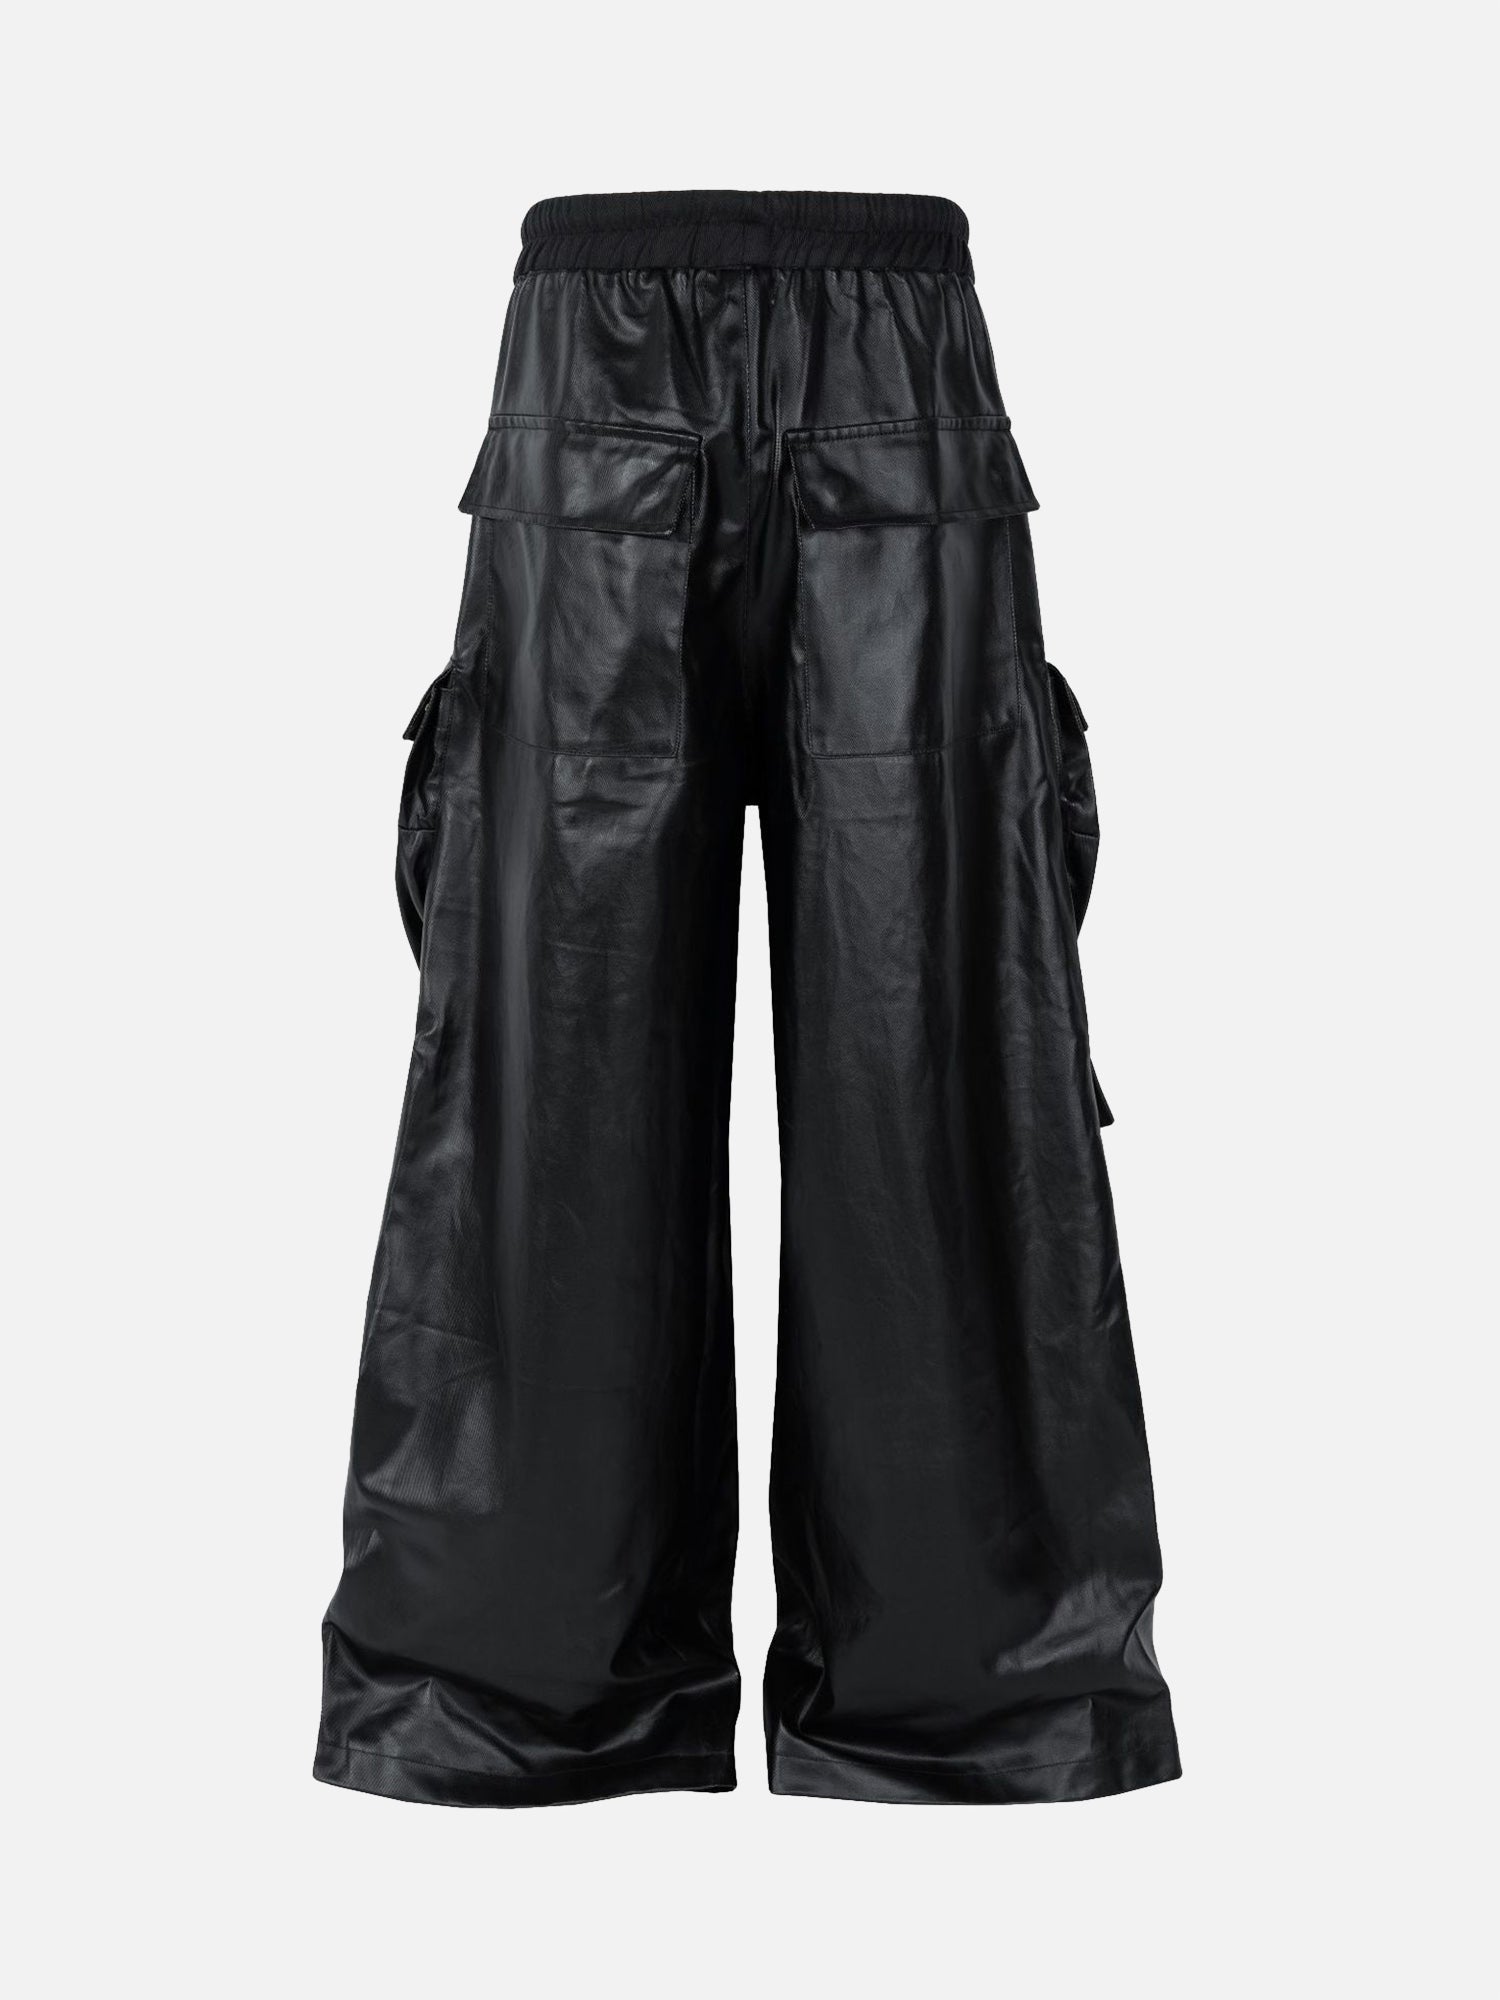 Thesupermade American Street Workwear Imitation Leather Layered Three-dimensional Pocket Wide-leg Flared Pants - 2094